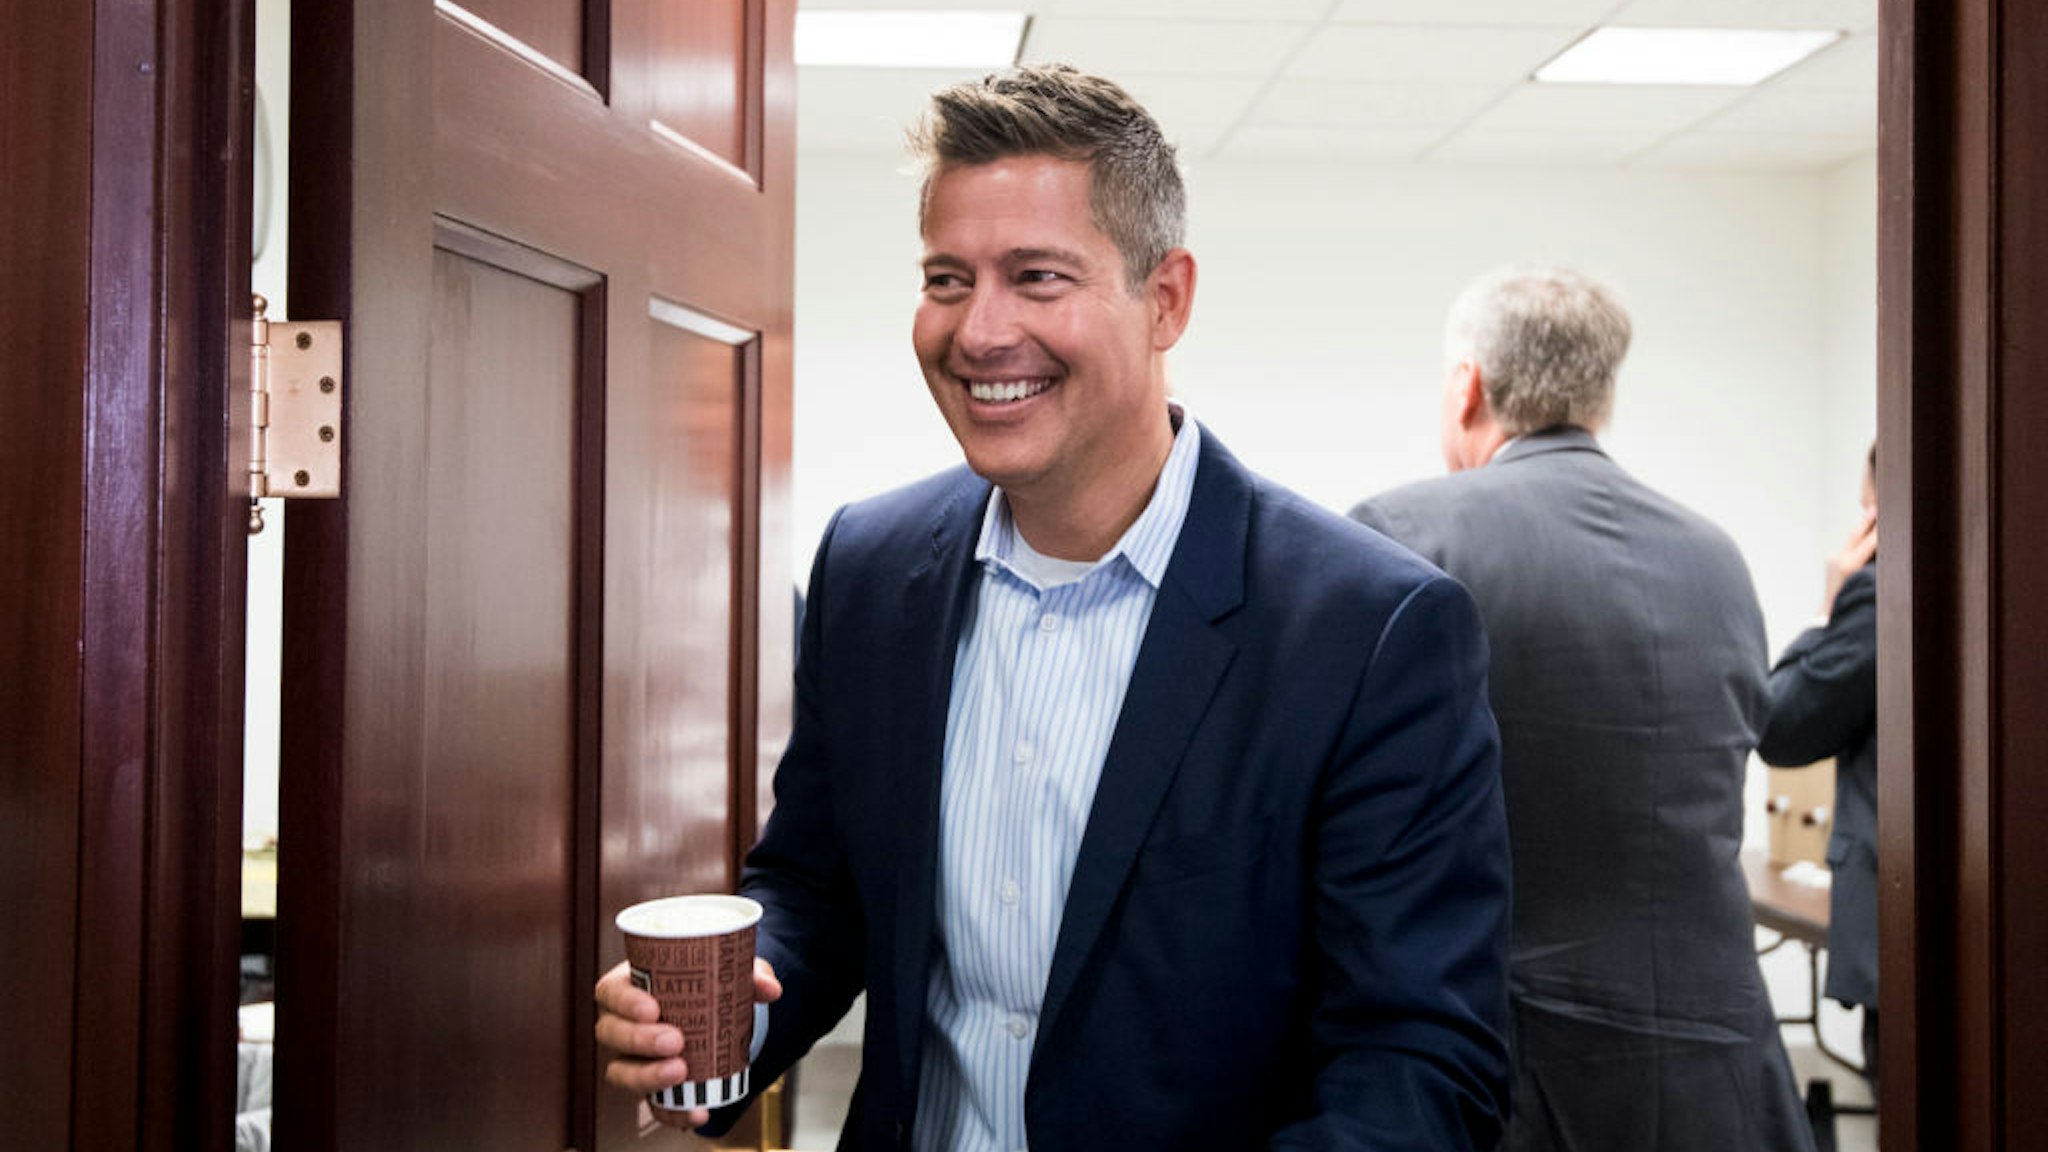 Sean Duffy leaves the House Republican Conference meeting in the Capitol